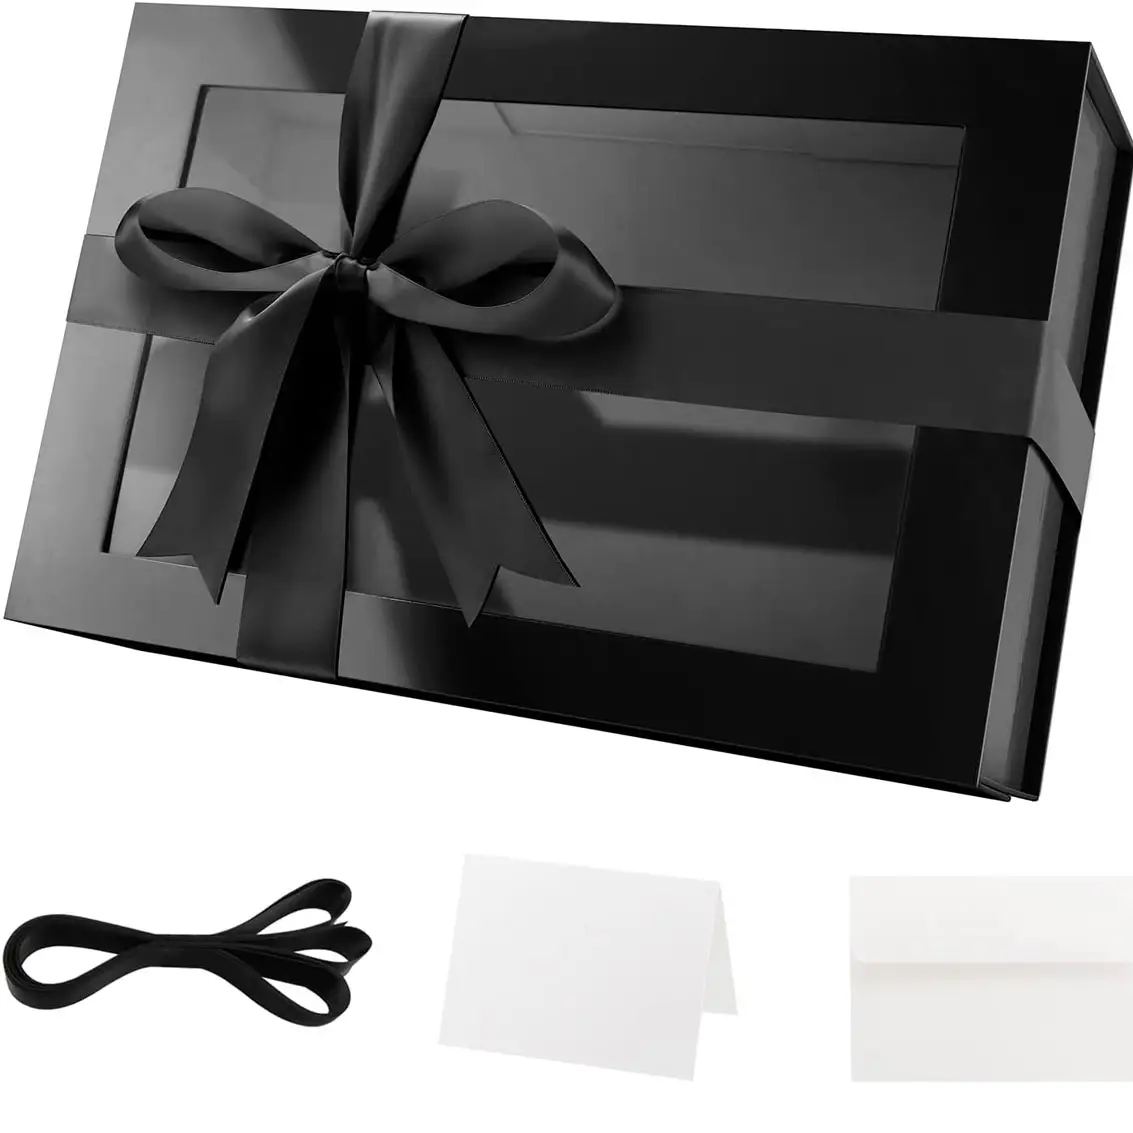 Large Clear Gift Box with Window, 13.5x9x4.1 Inches Black Gift Box for Present Contains Ribbon, Card, Groomsman Proposal Box